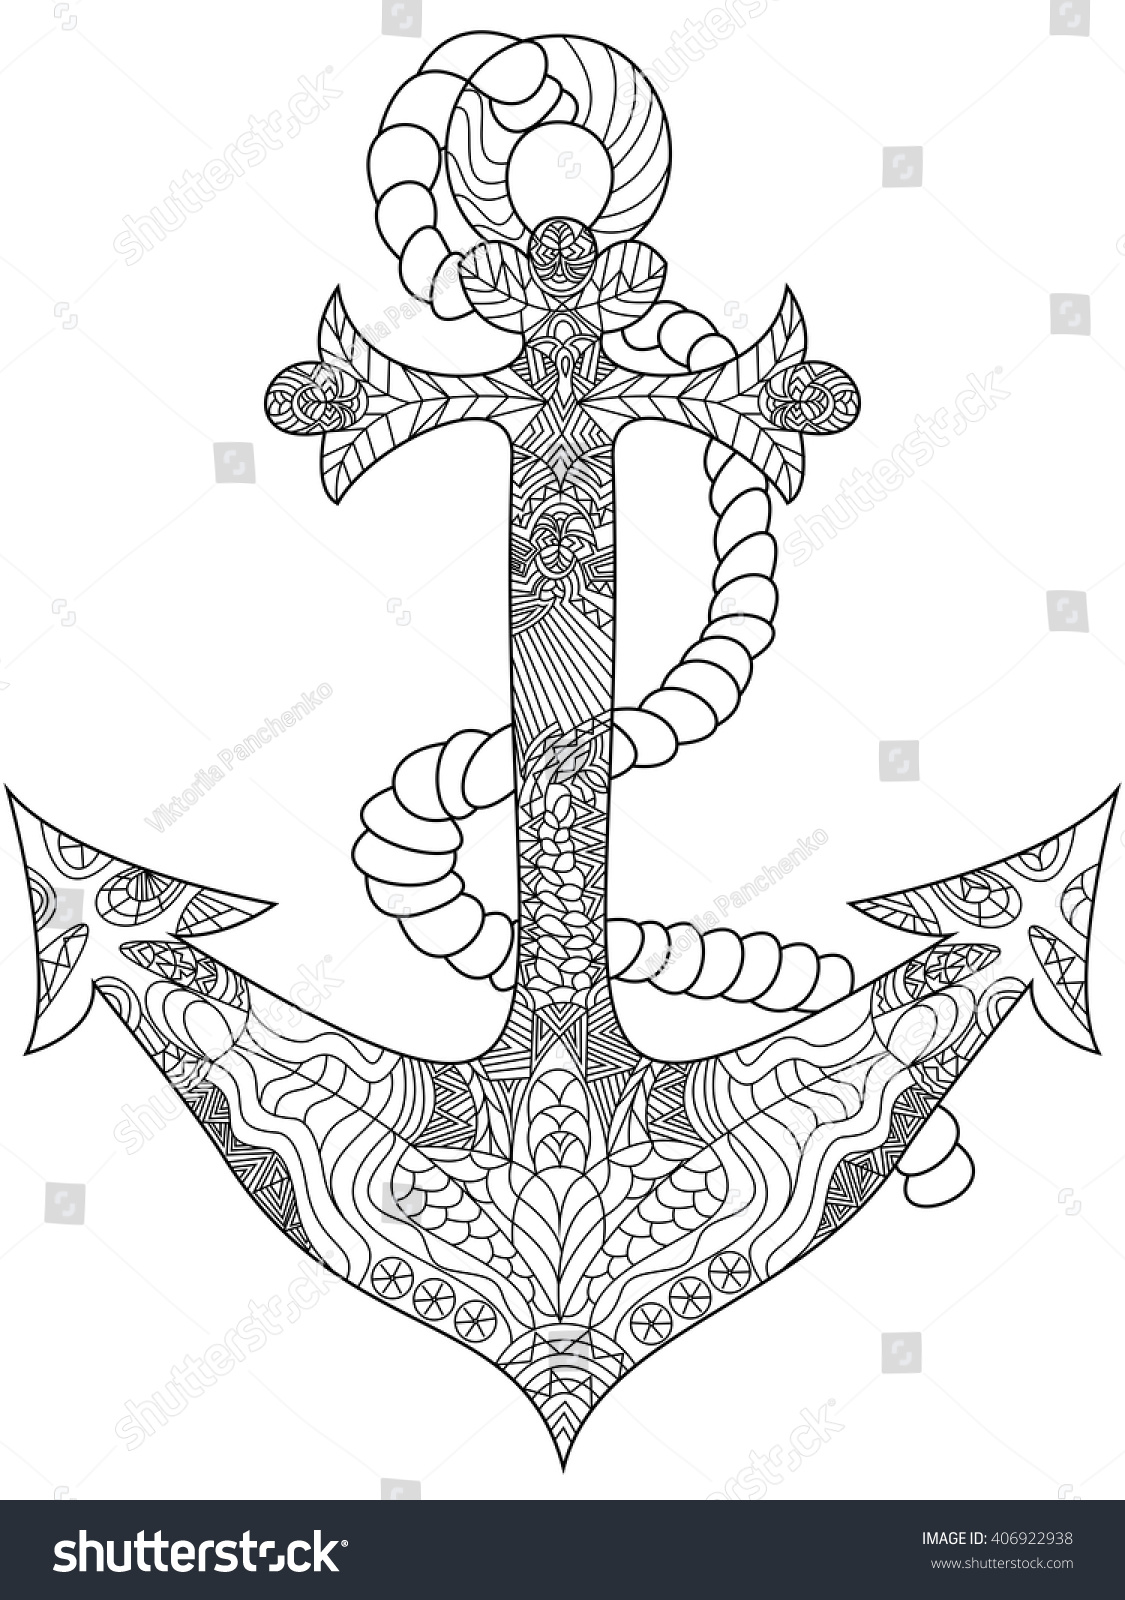 Download Anchor Coloring Book Adults Vector Illustration Stock Vector 406922938 - Shutterstock